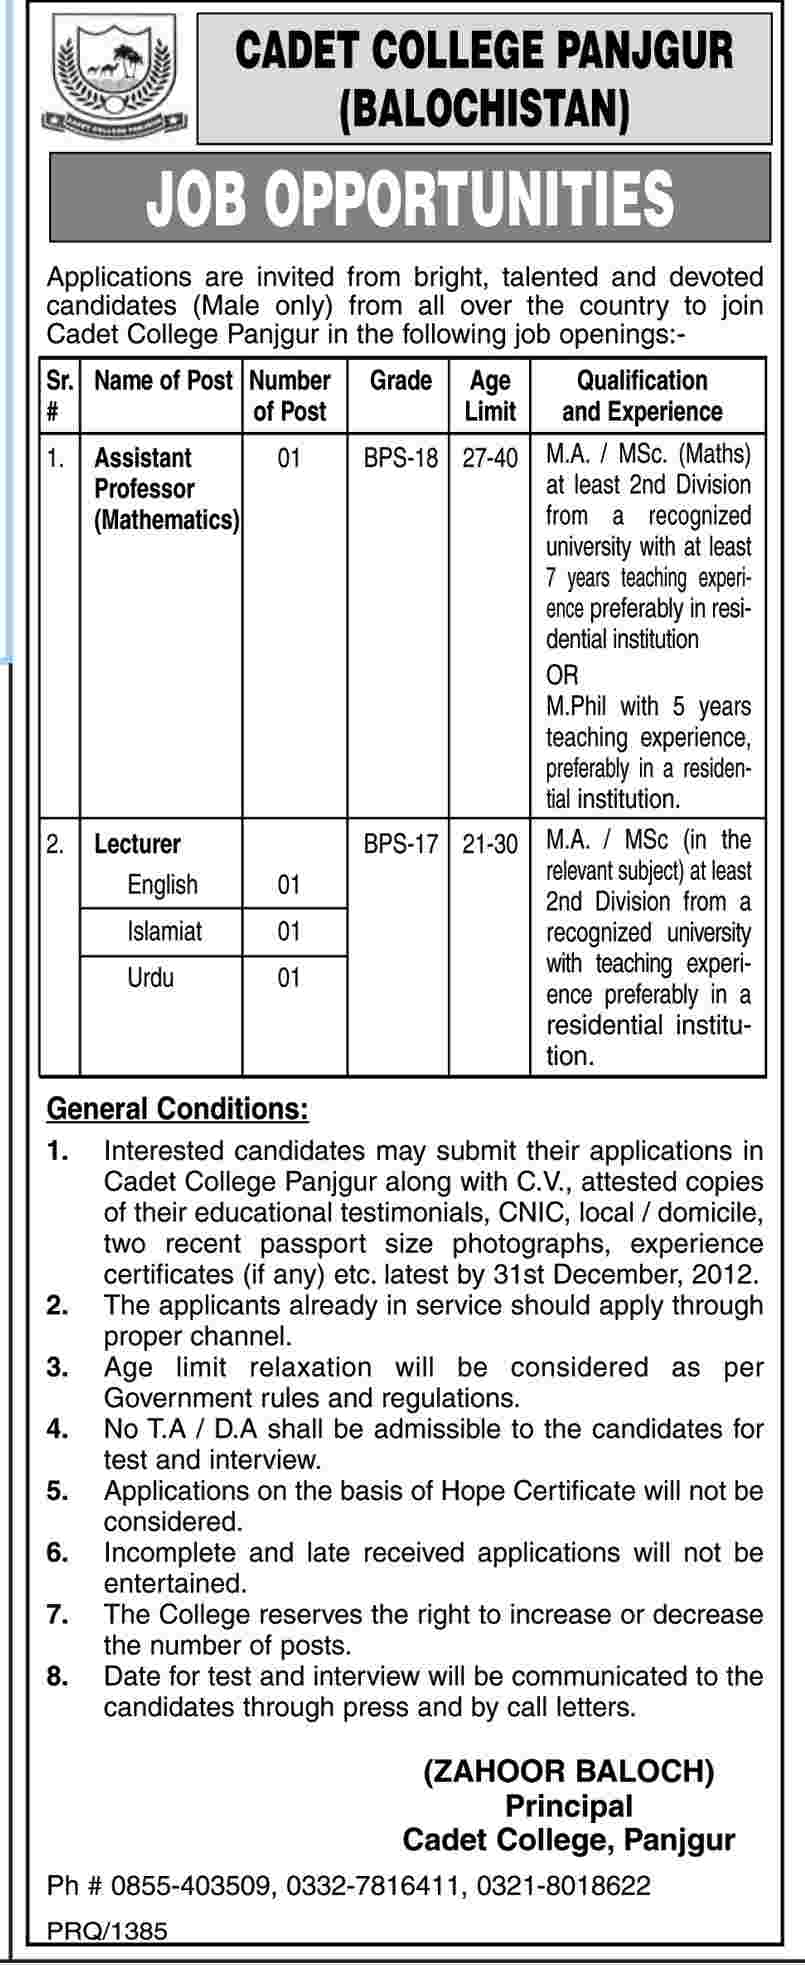 Cadet College Panjgur Jobs for Assistant Professor and Lecturers